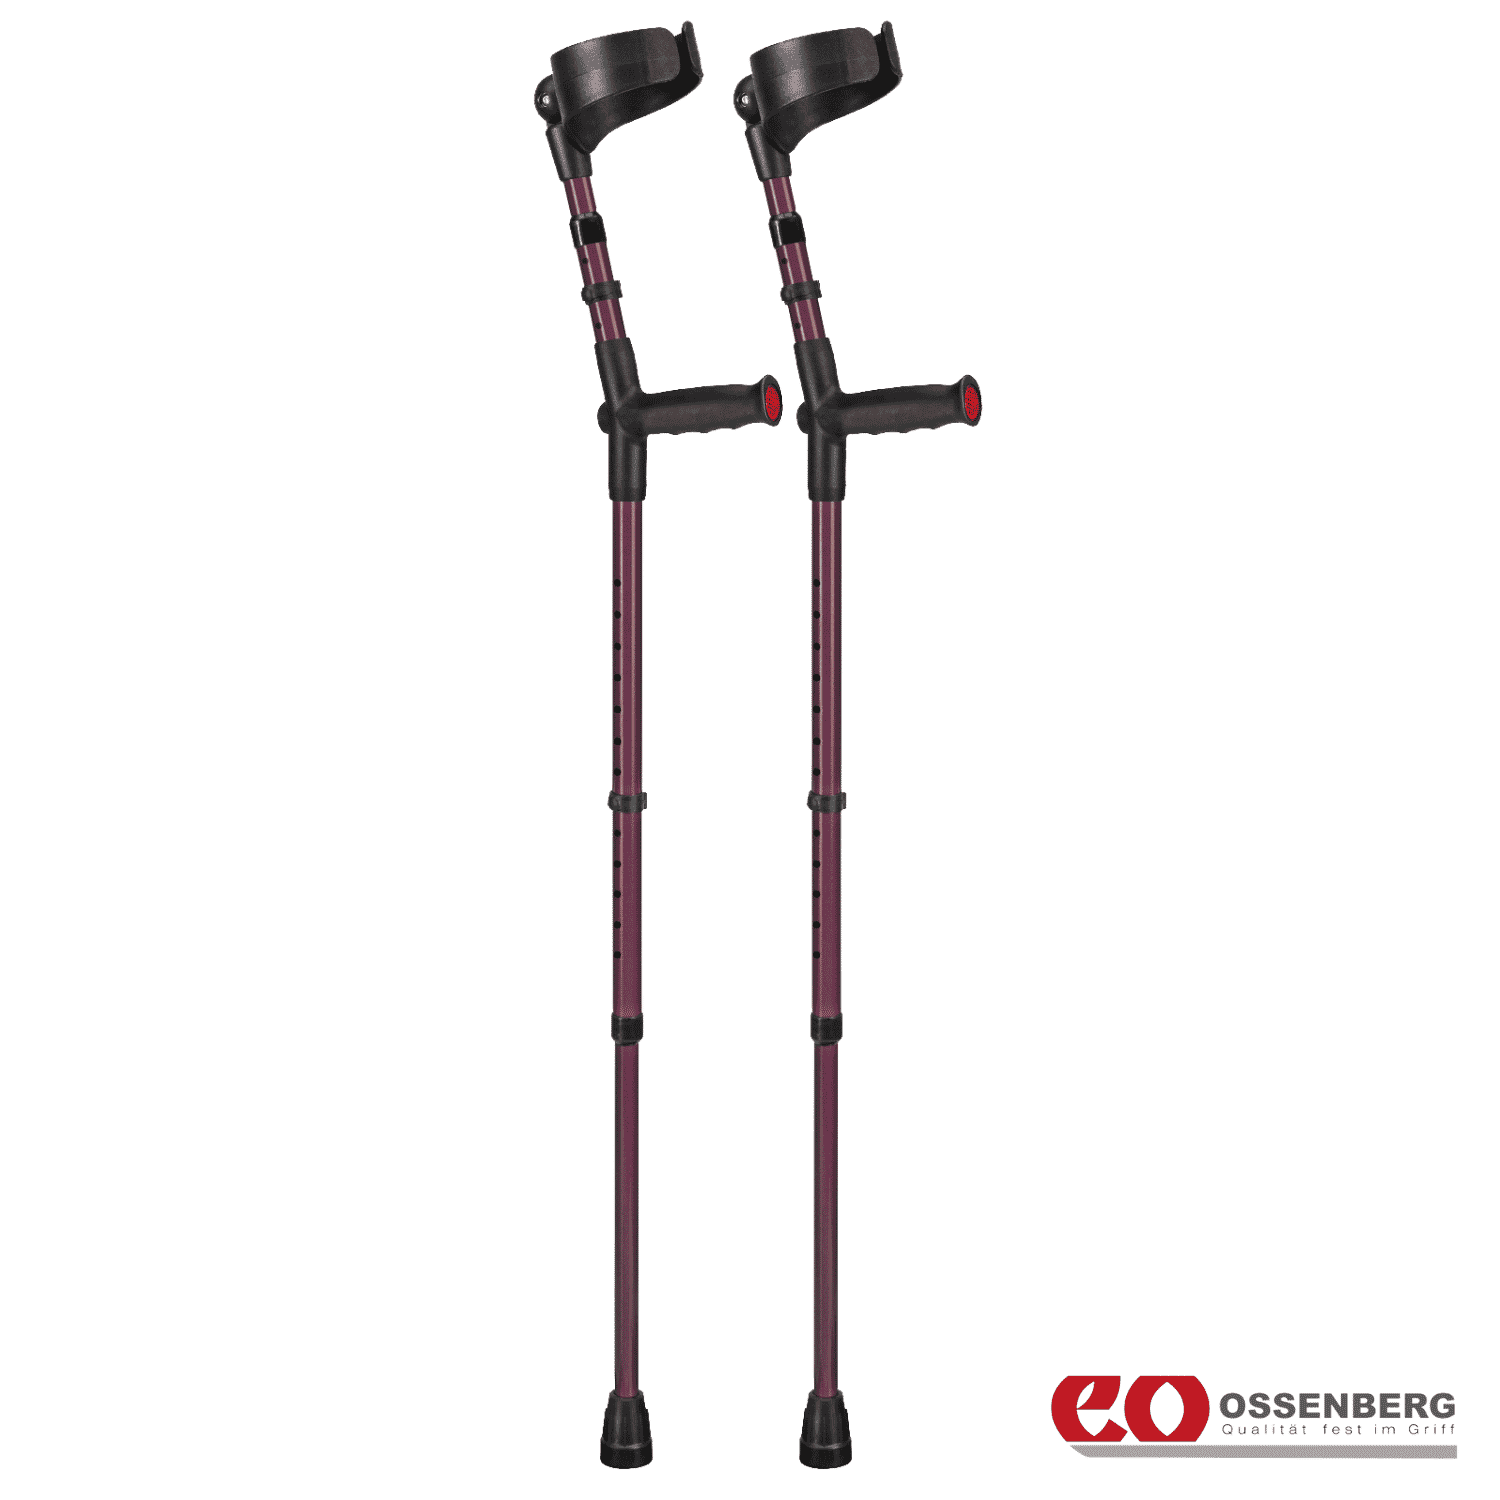 View Ossenberg Soft Grip Double Adjustable Crutches Blackberry Pair information